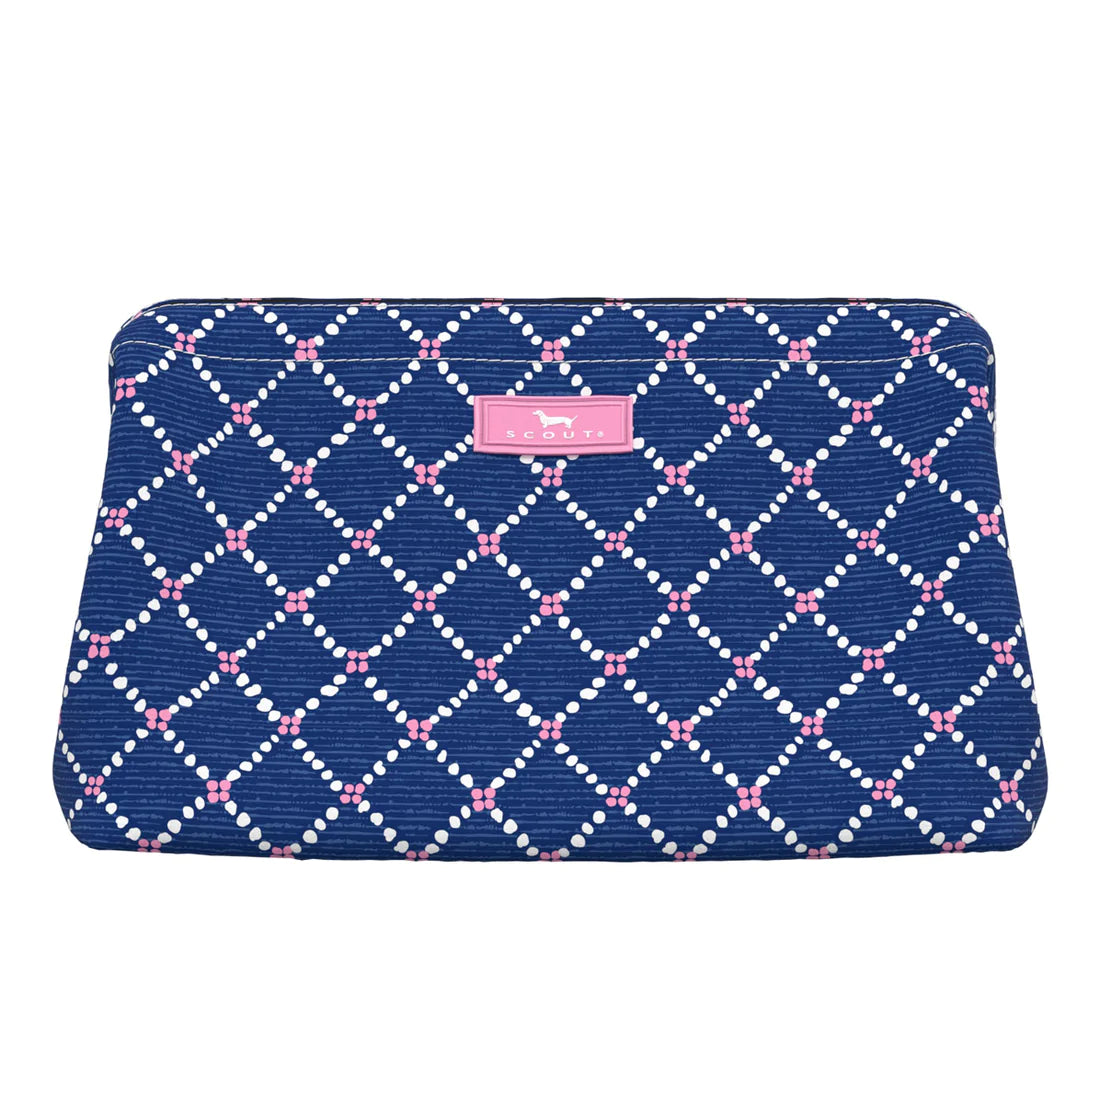 Scout Big Mouth Toiletry Bag - Tea Time